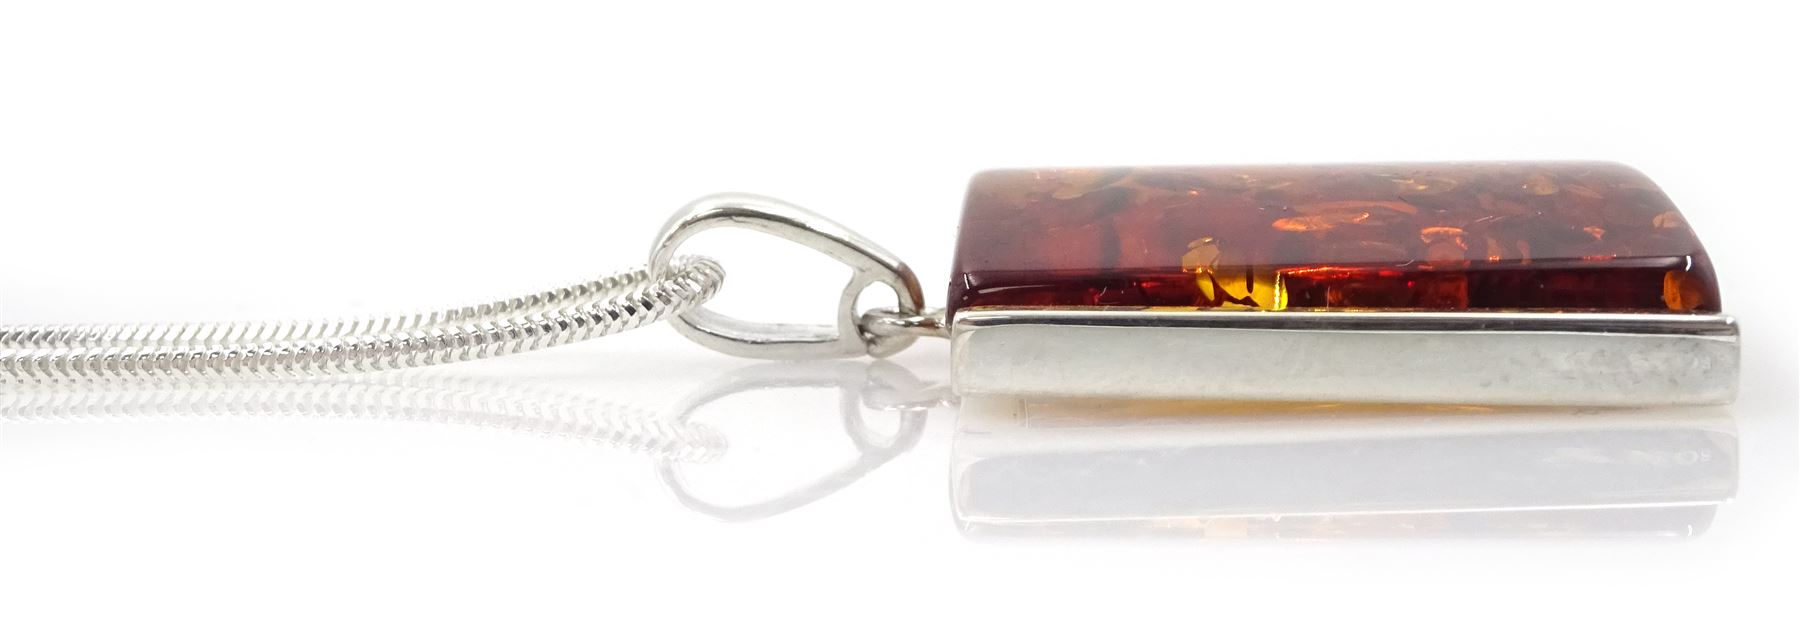 Silver square Baltic amber pendant necklace - Image 2 of 2